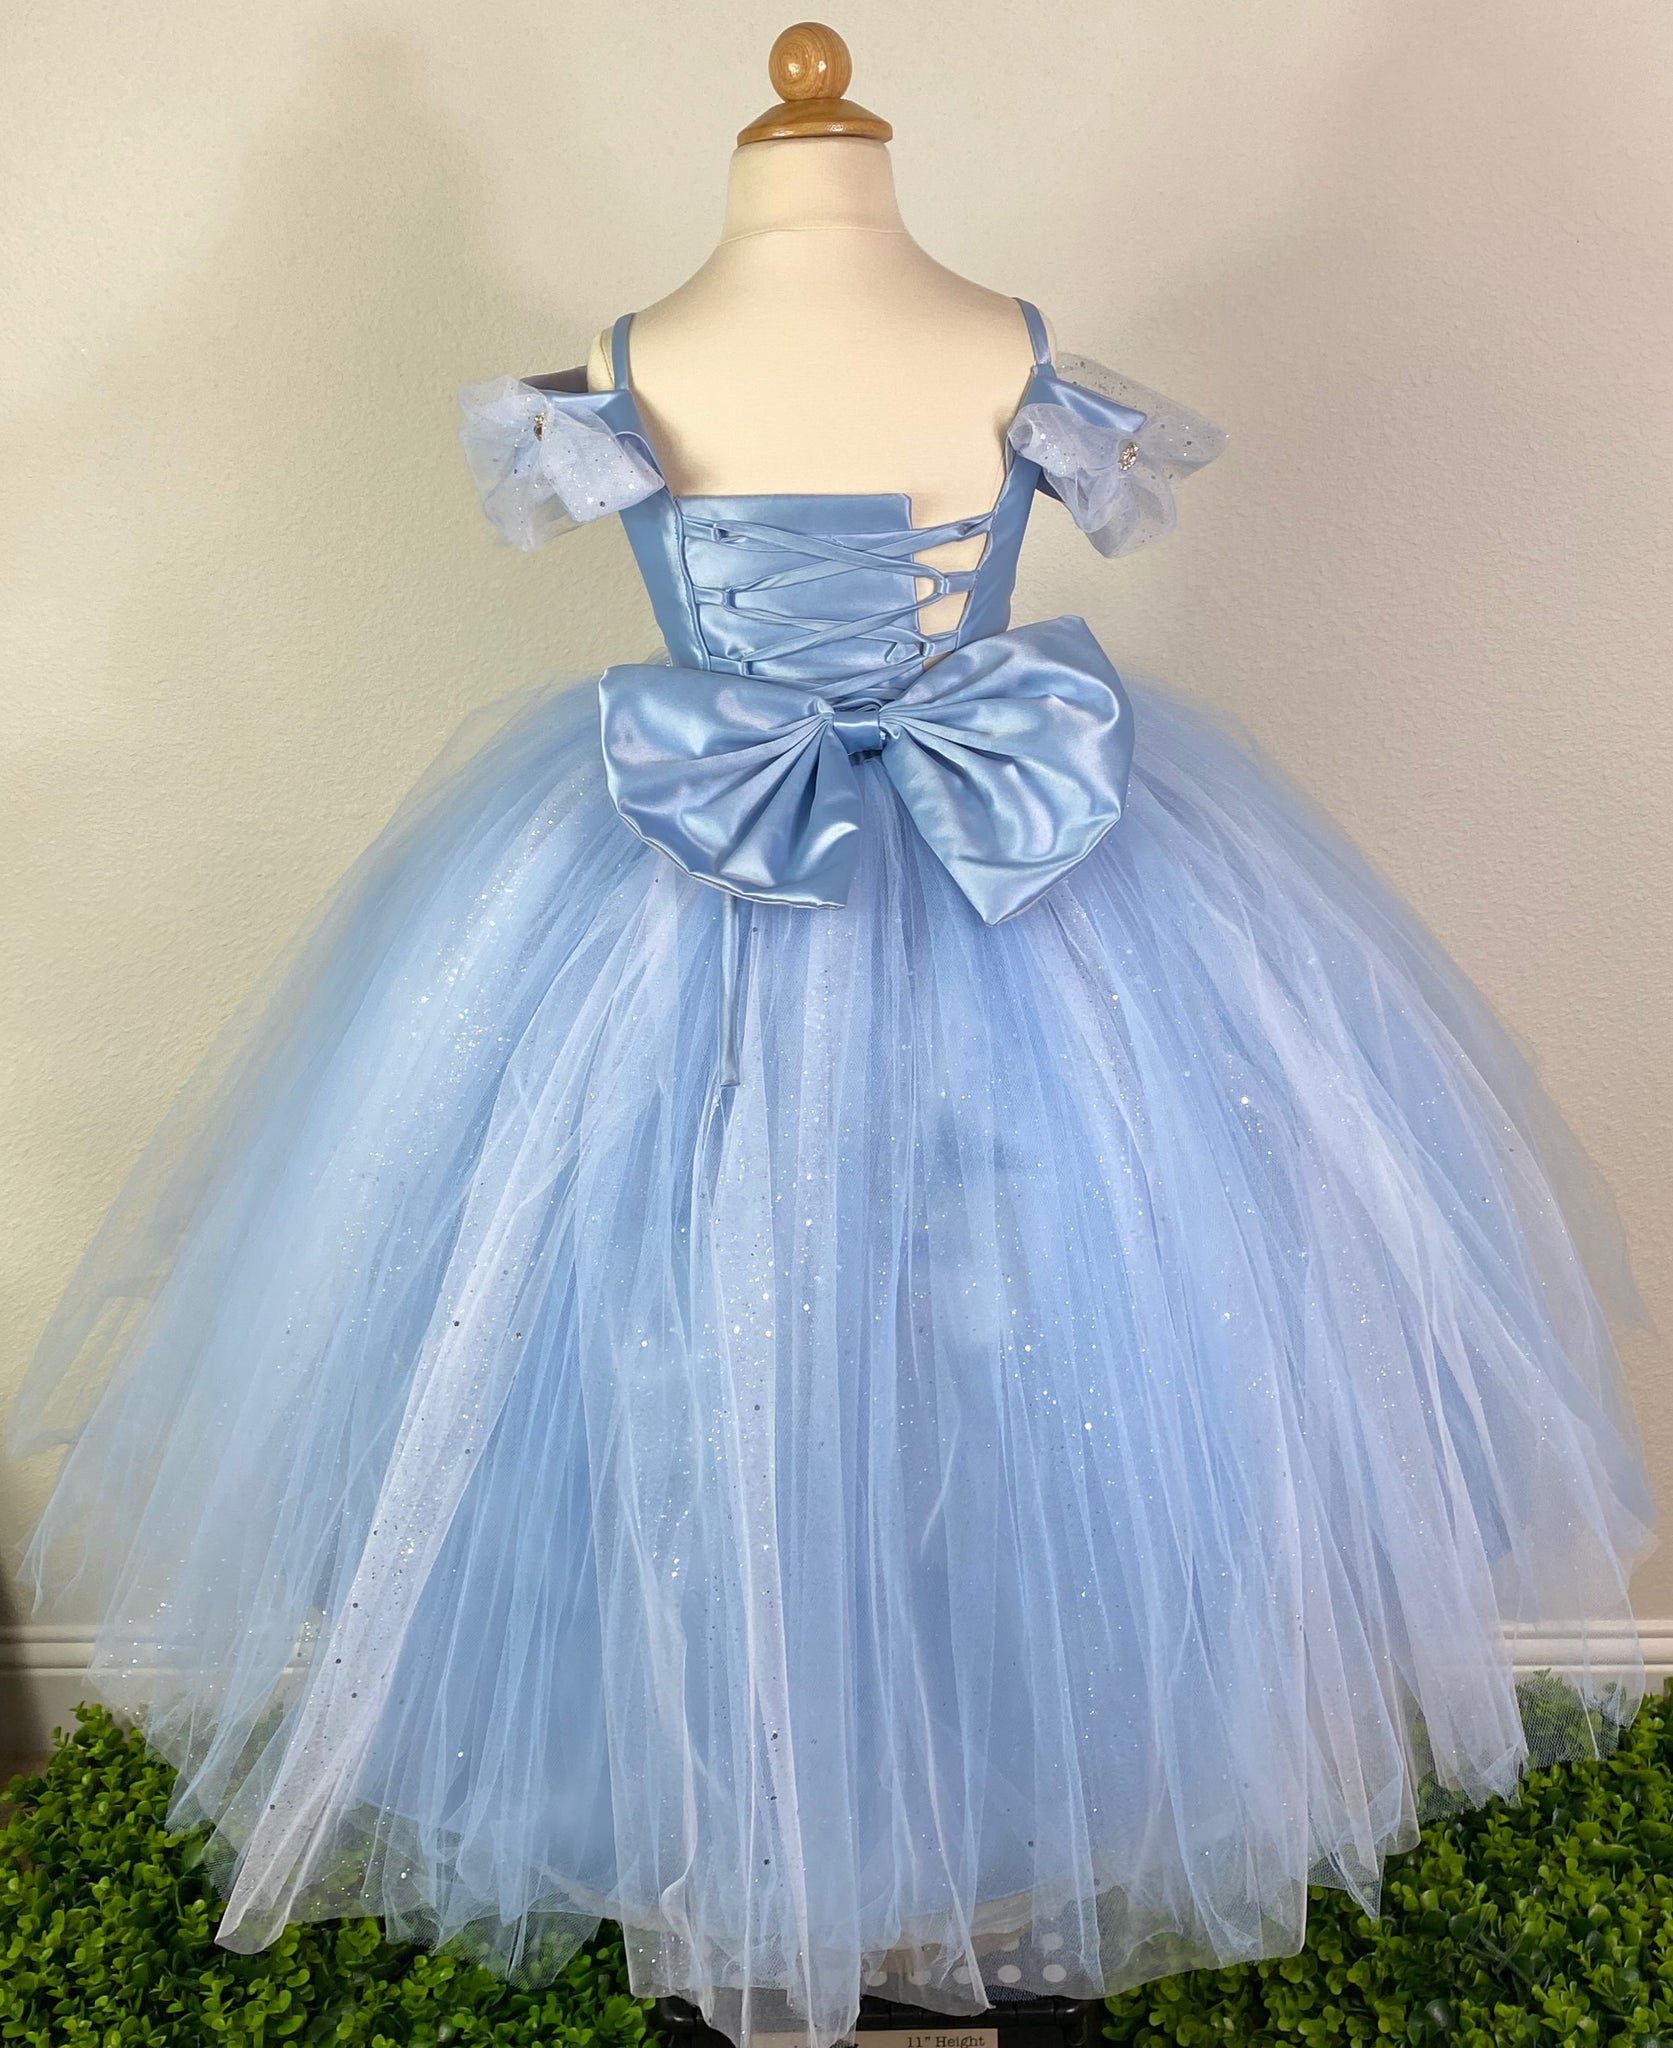 This beautiful dress comes in two colors- Yellow & Blue Satin bodice  Off the shoulder sleeve Sparkle tulle wrapping around bodice and sleeves Rhinestones placed throughout tulle Swirled rhinestone belting Large tulle skirting with peak-a-boo sparkle tulle Coreset style back Large bow on back Dress pictured with a petticoat Petticoat not included  Choose from a tulle, cloth, or wire for best look